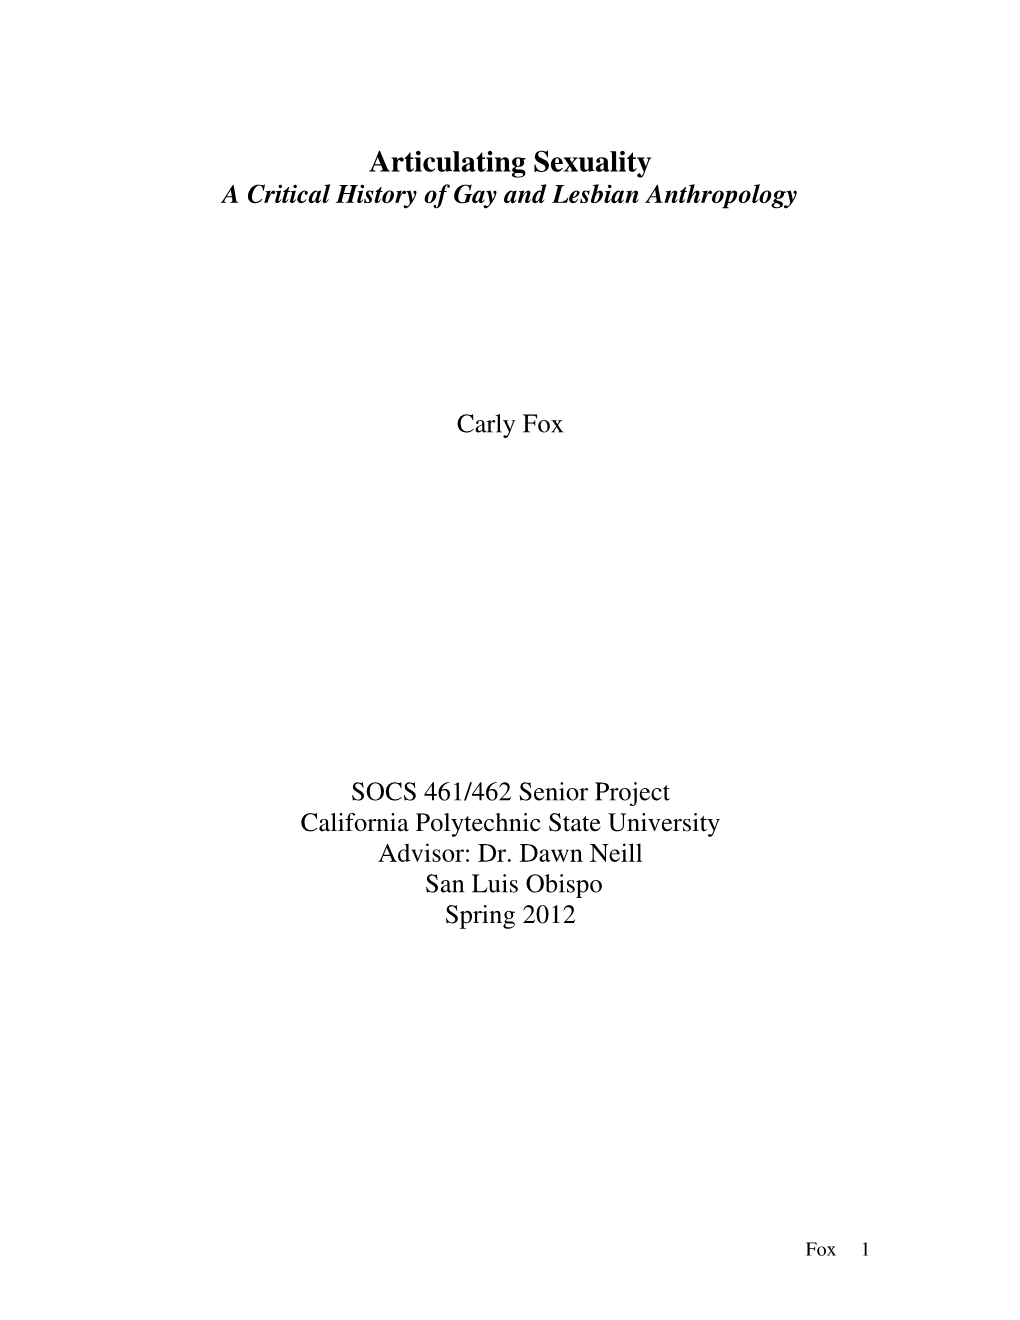 A Critical History of Gay and Lesbian Anthropology